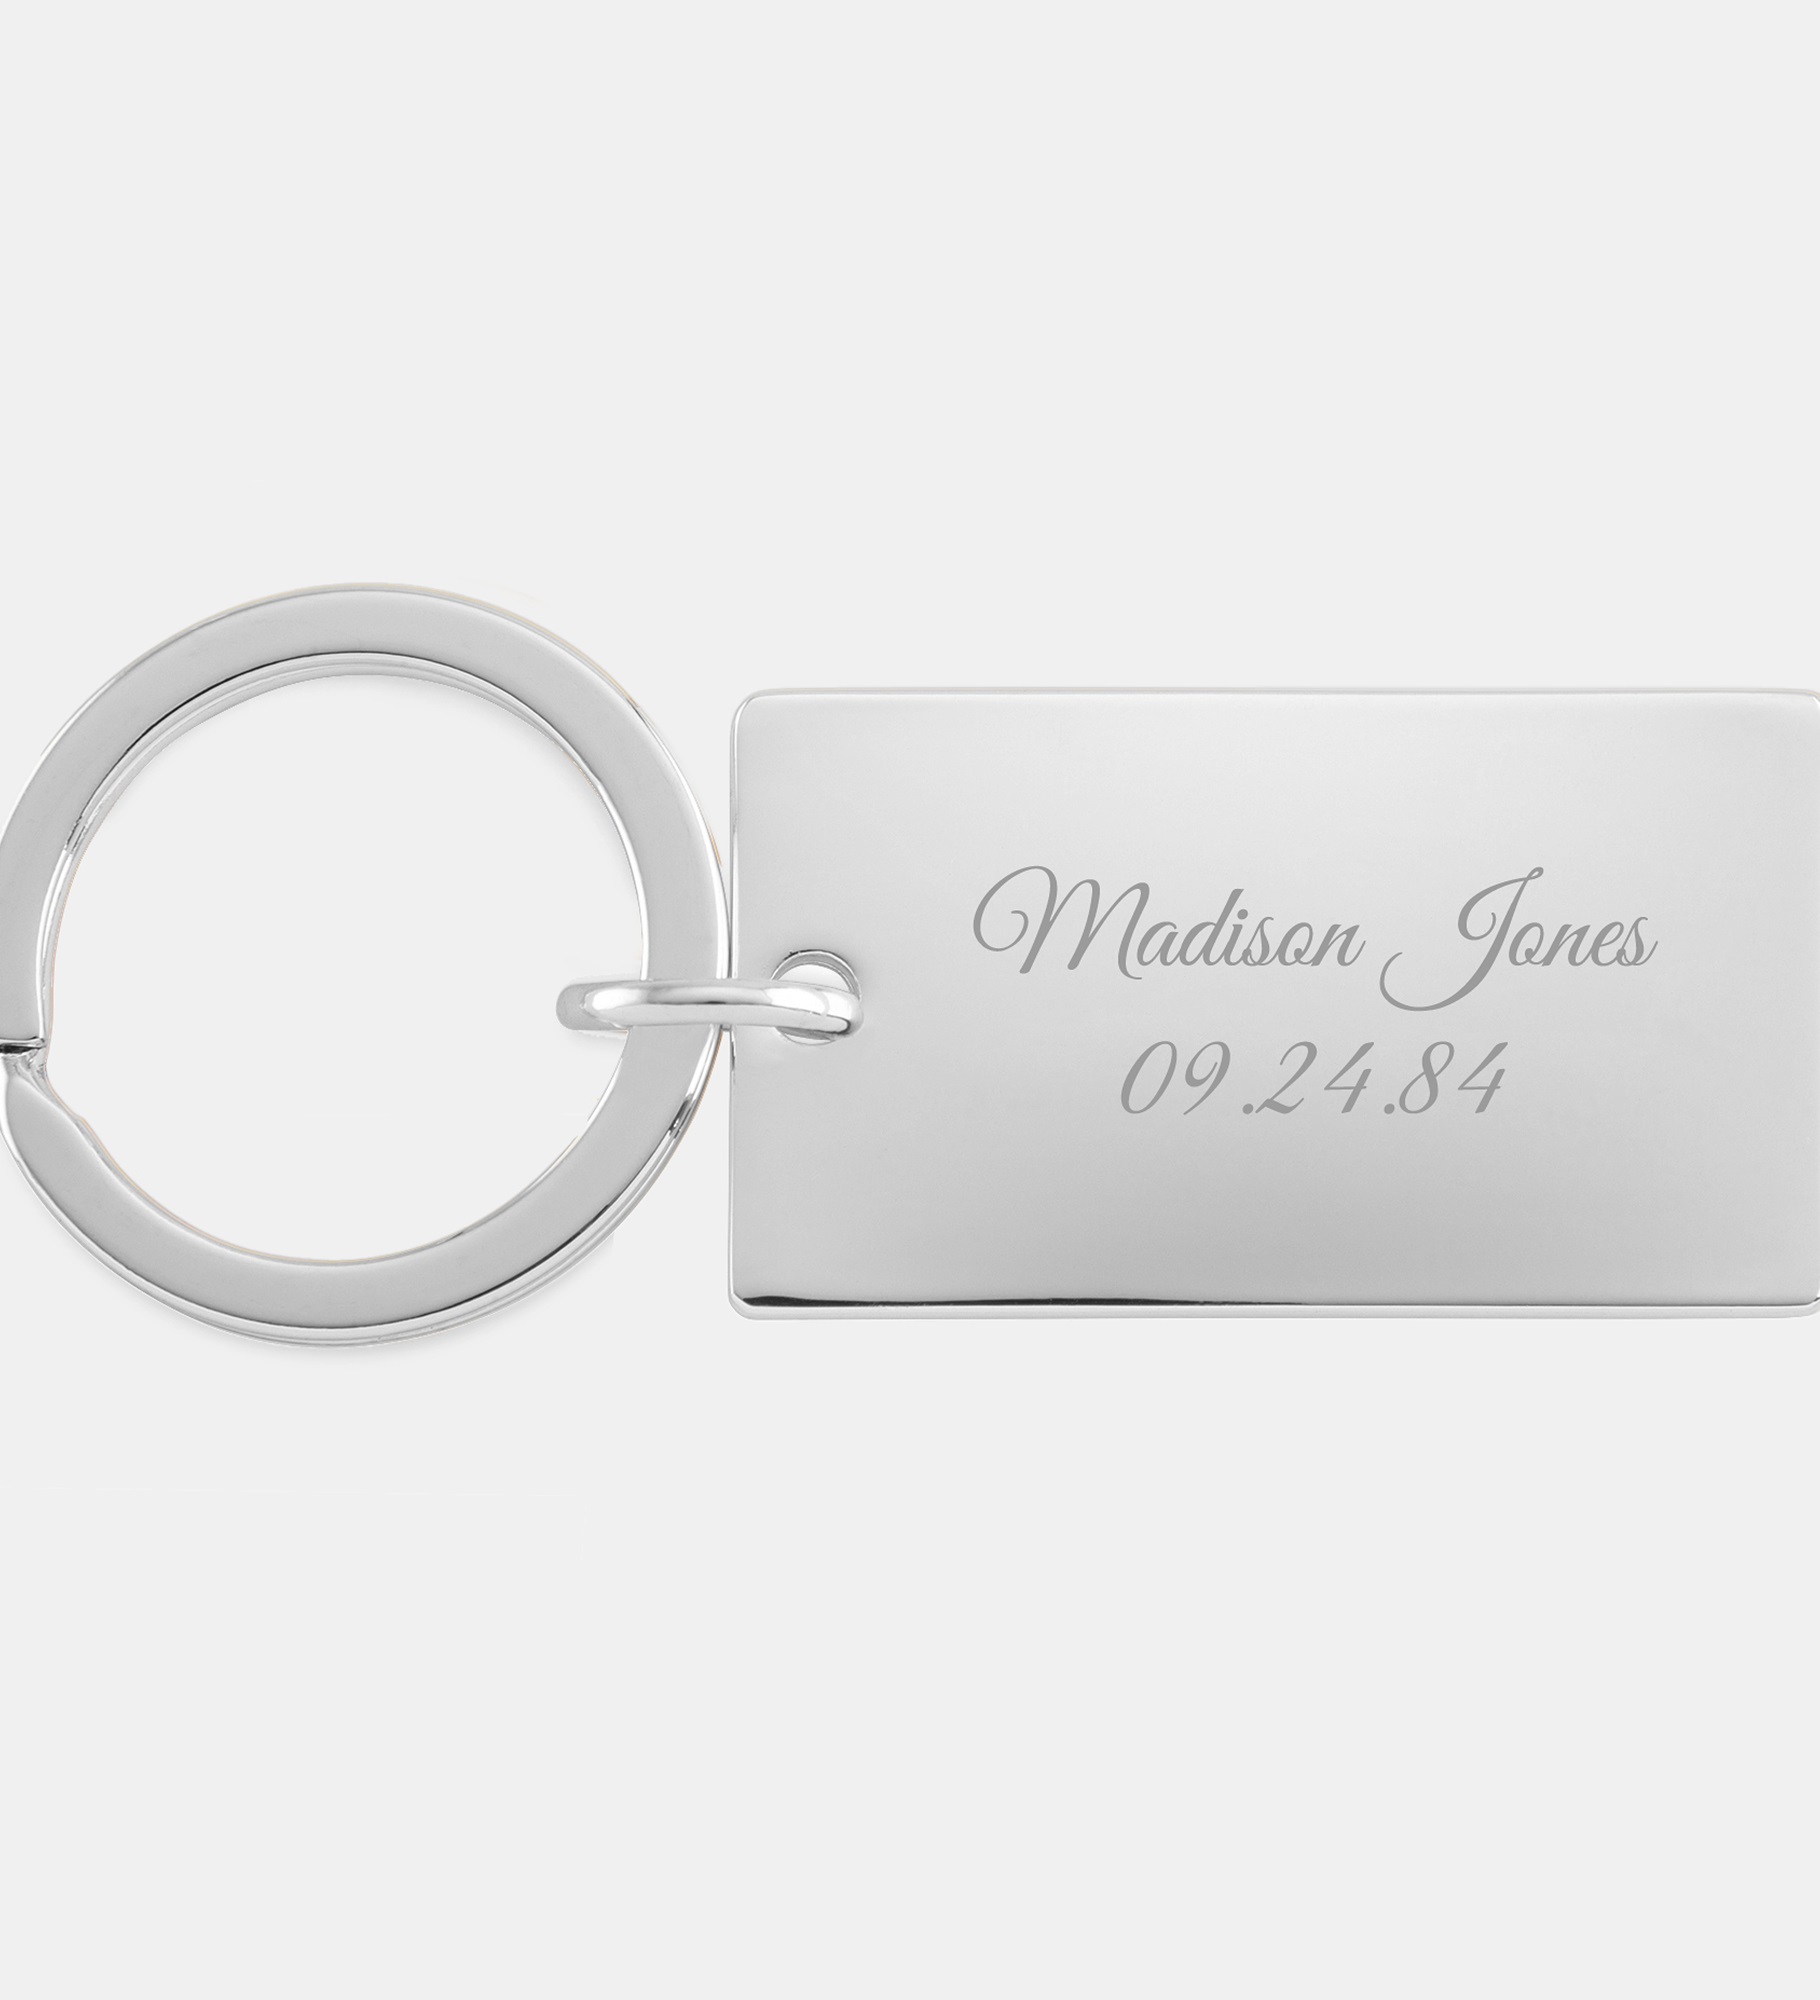  Engraved Nickel Rectangle Keychain